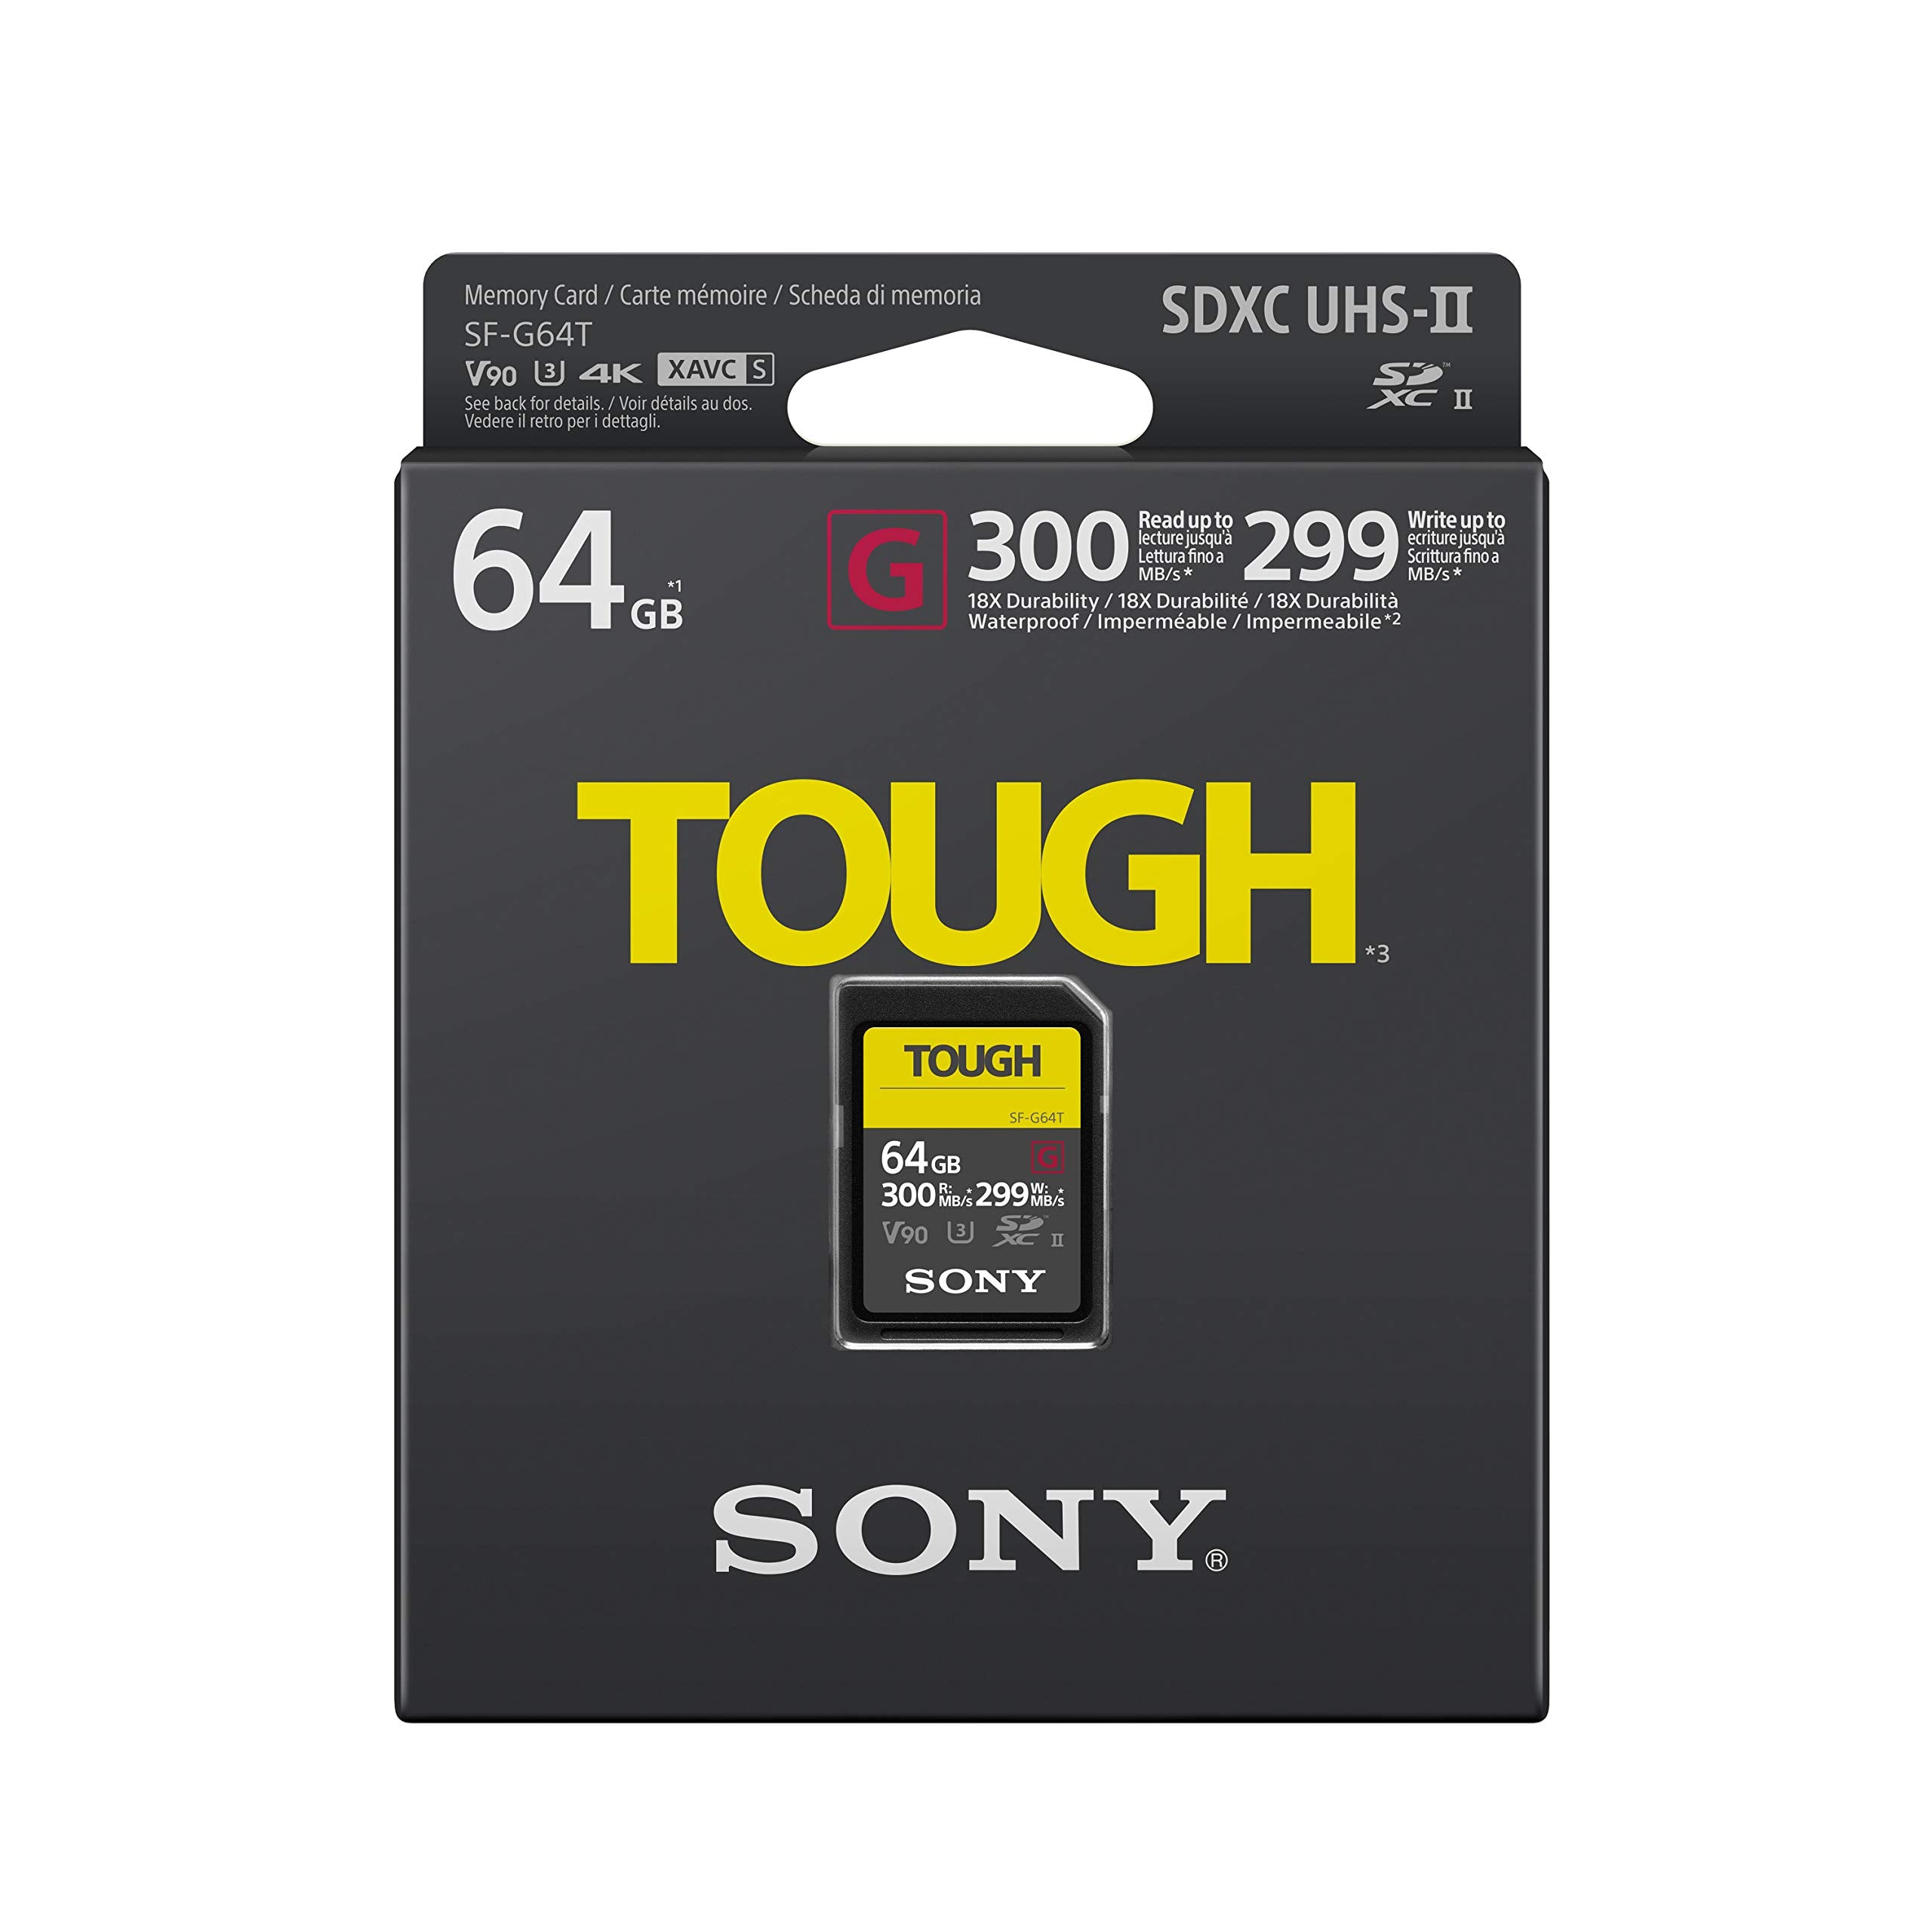 Sony Tough High Performance 64GB SDXC UHS-II Class 10 U3 Flash Memory Card with Blazing Fast Read Speed up to 300MB/s (SF-G64T/T1)